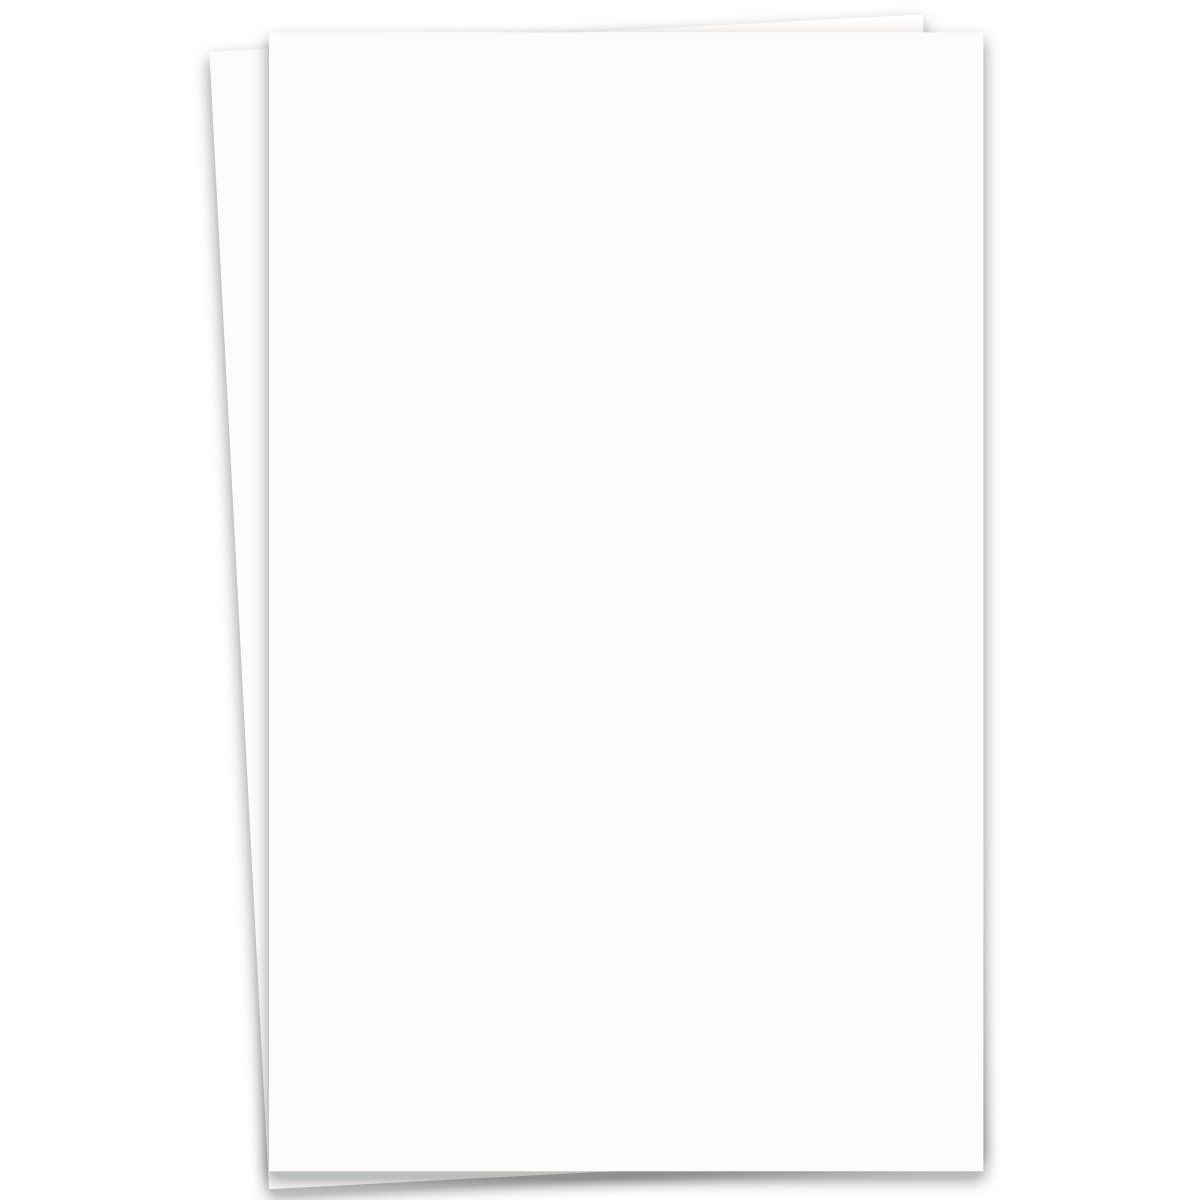 REMAKE Oyster - 12X12 Paper 32/81lb Text (120gsm) - 200 PK -at PaperPapers